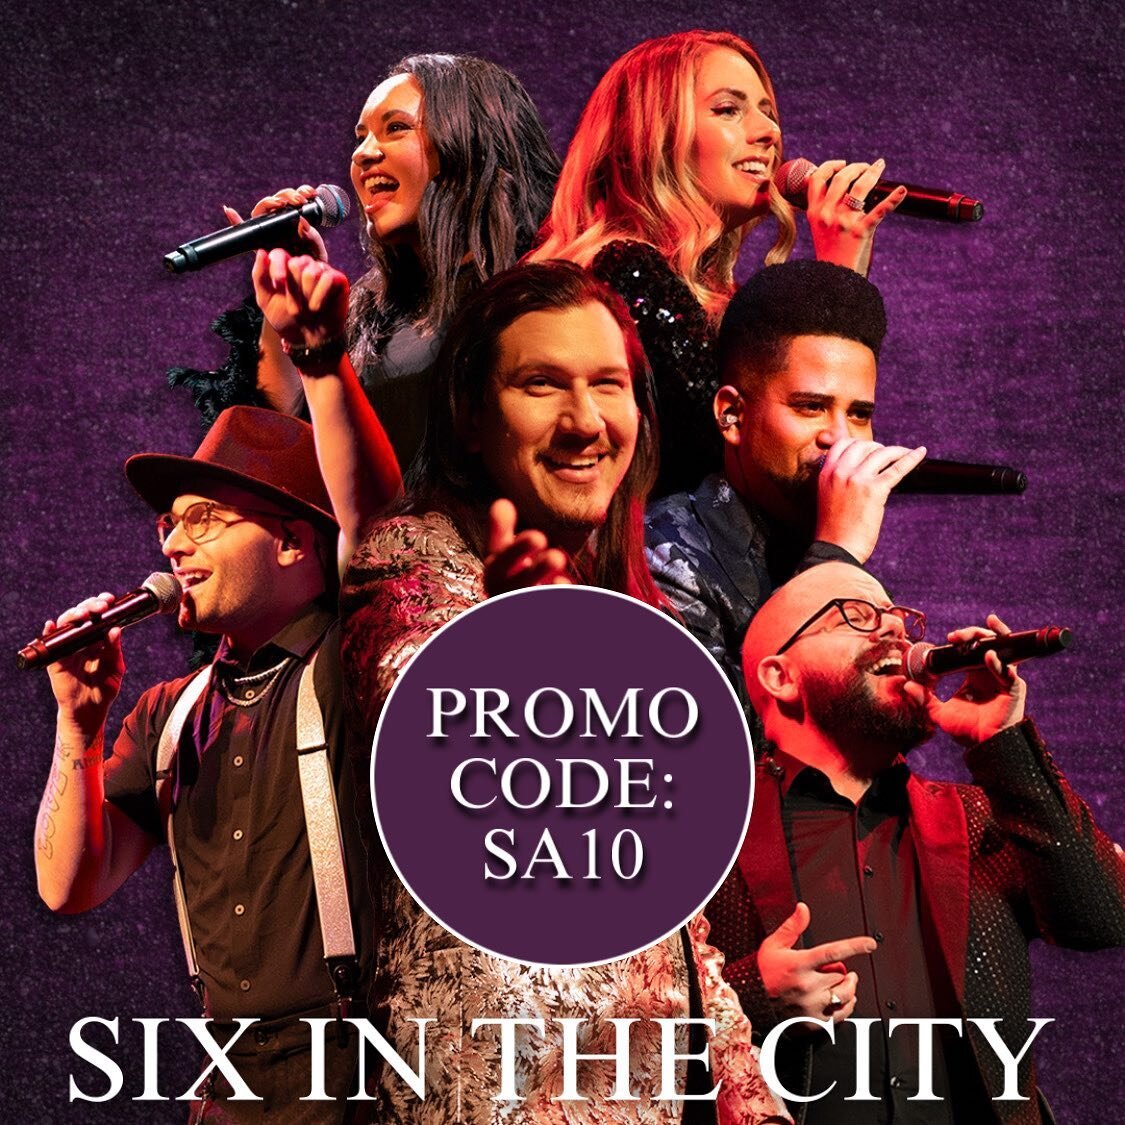 🎶 Six in the City 🎶 FLASH SALE! Use the code, SA10 for $10 off your ticket!!! An incredible night of a cappella PLUS our special guest @robynadeleanderson! 🤍 A new block of seats has opened up- we'll see you on SUNDAY, 4/16 in NYC! 🎟️